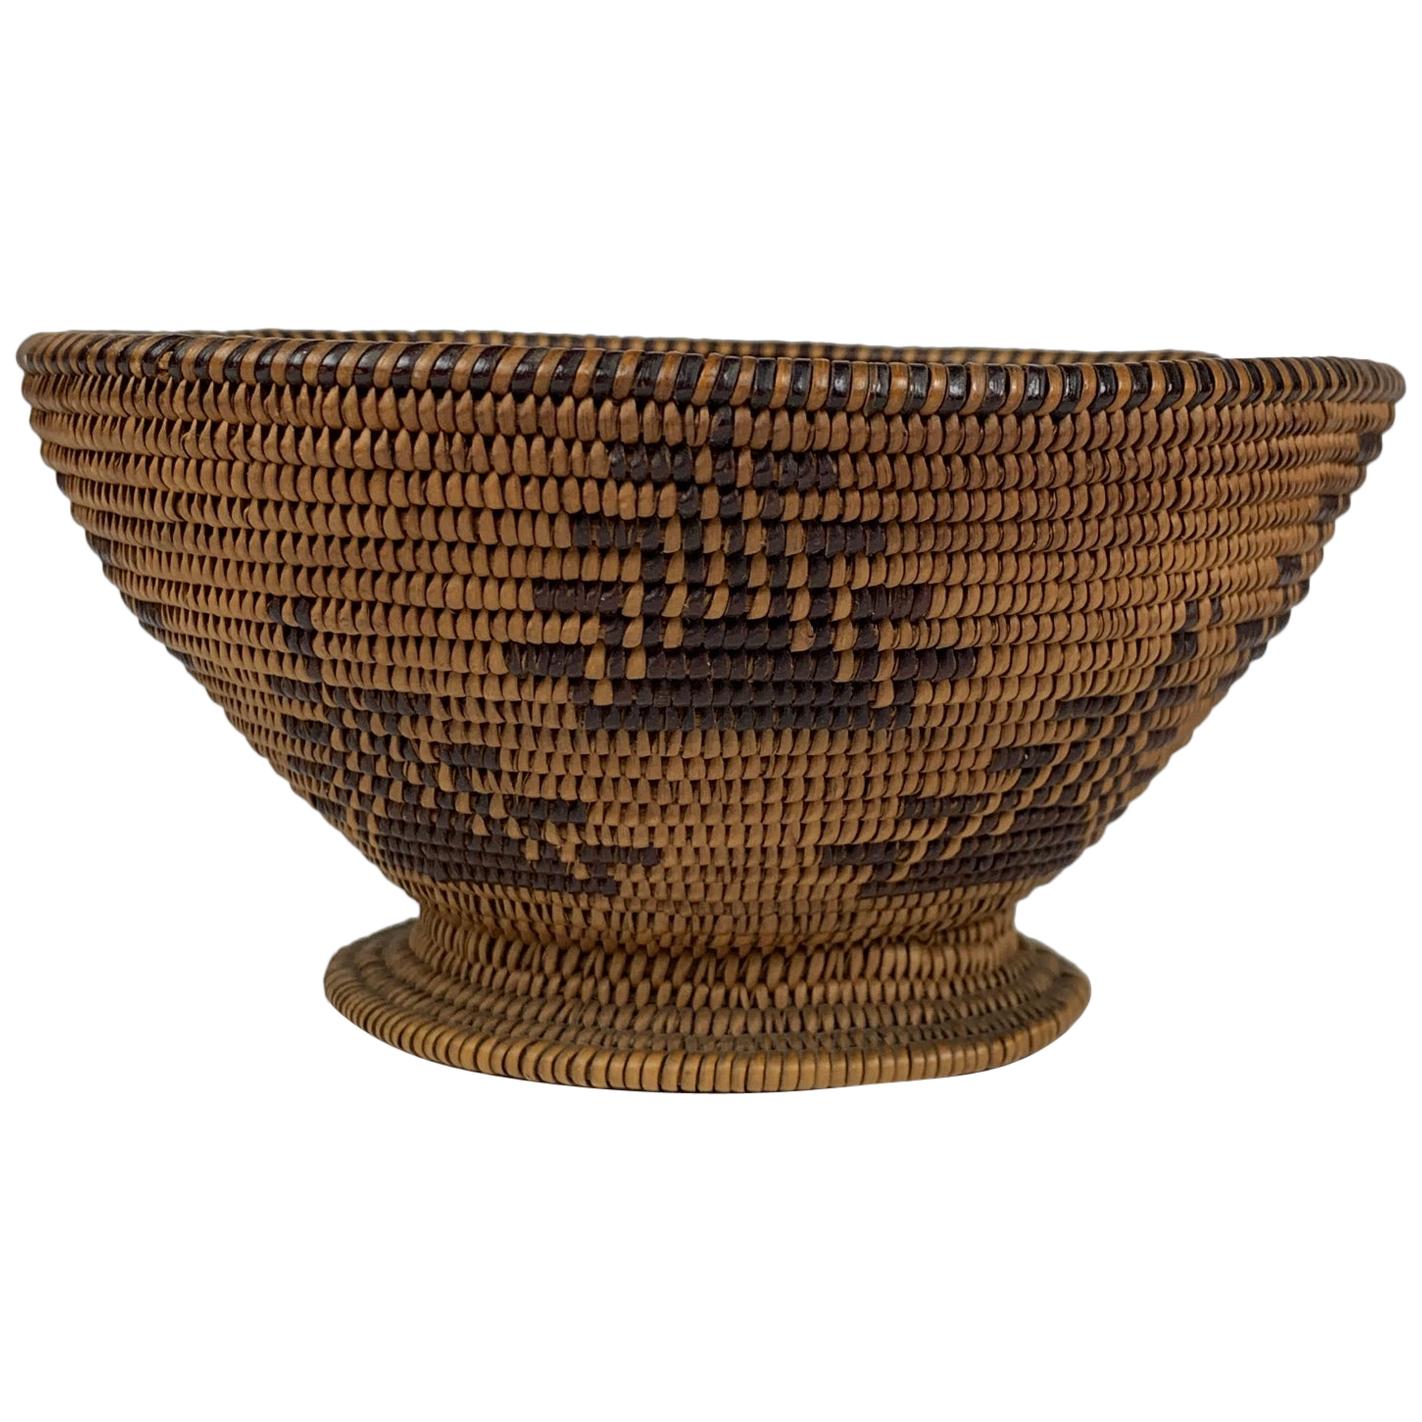 Native American Woven Bowl Form Basket For Sale